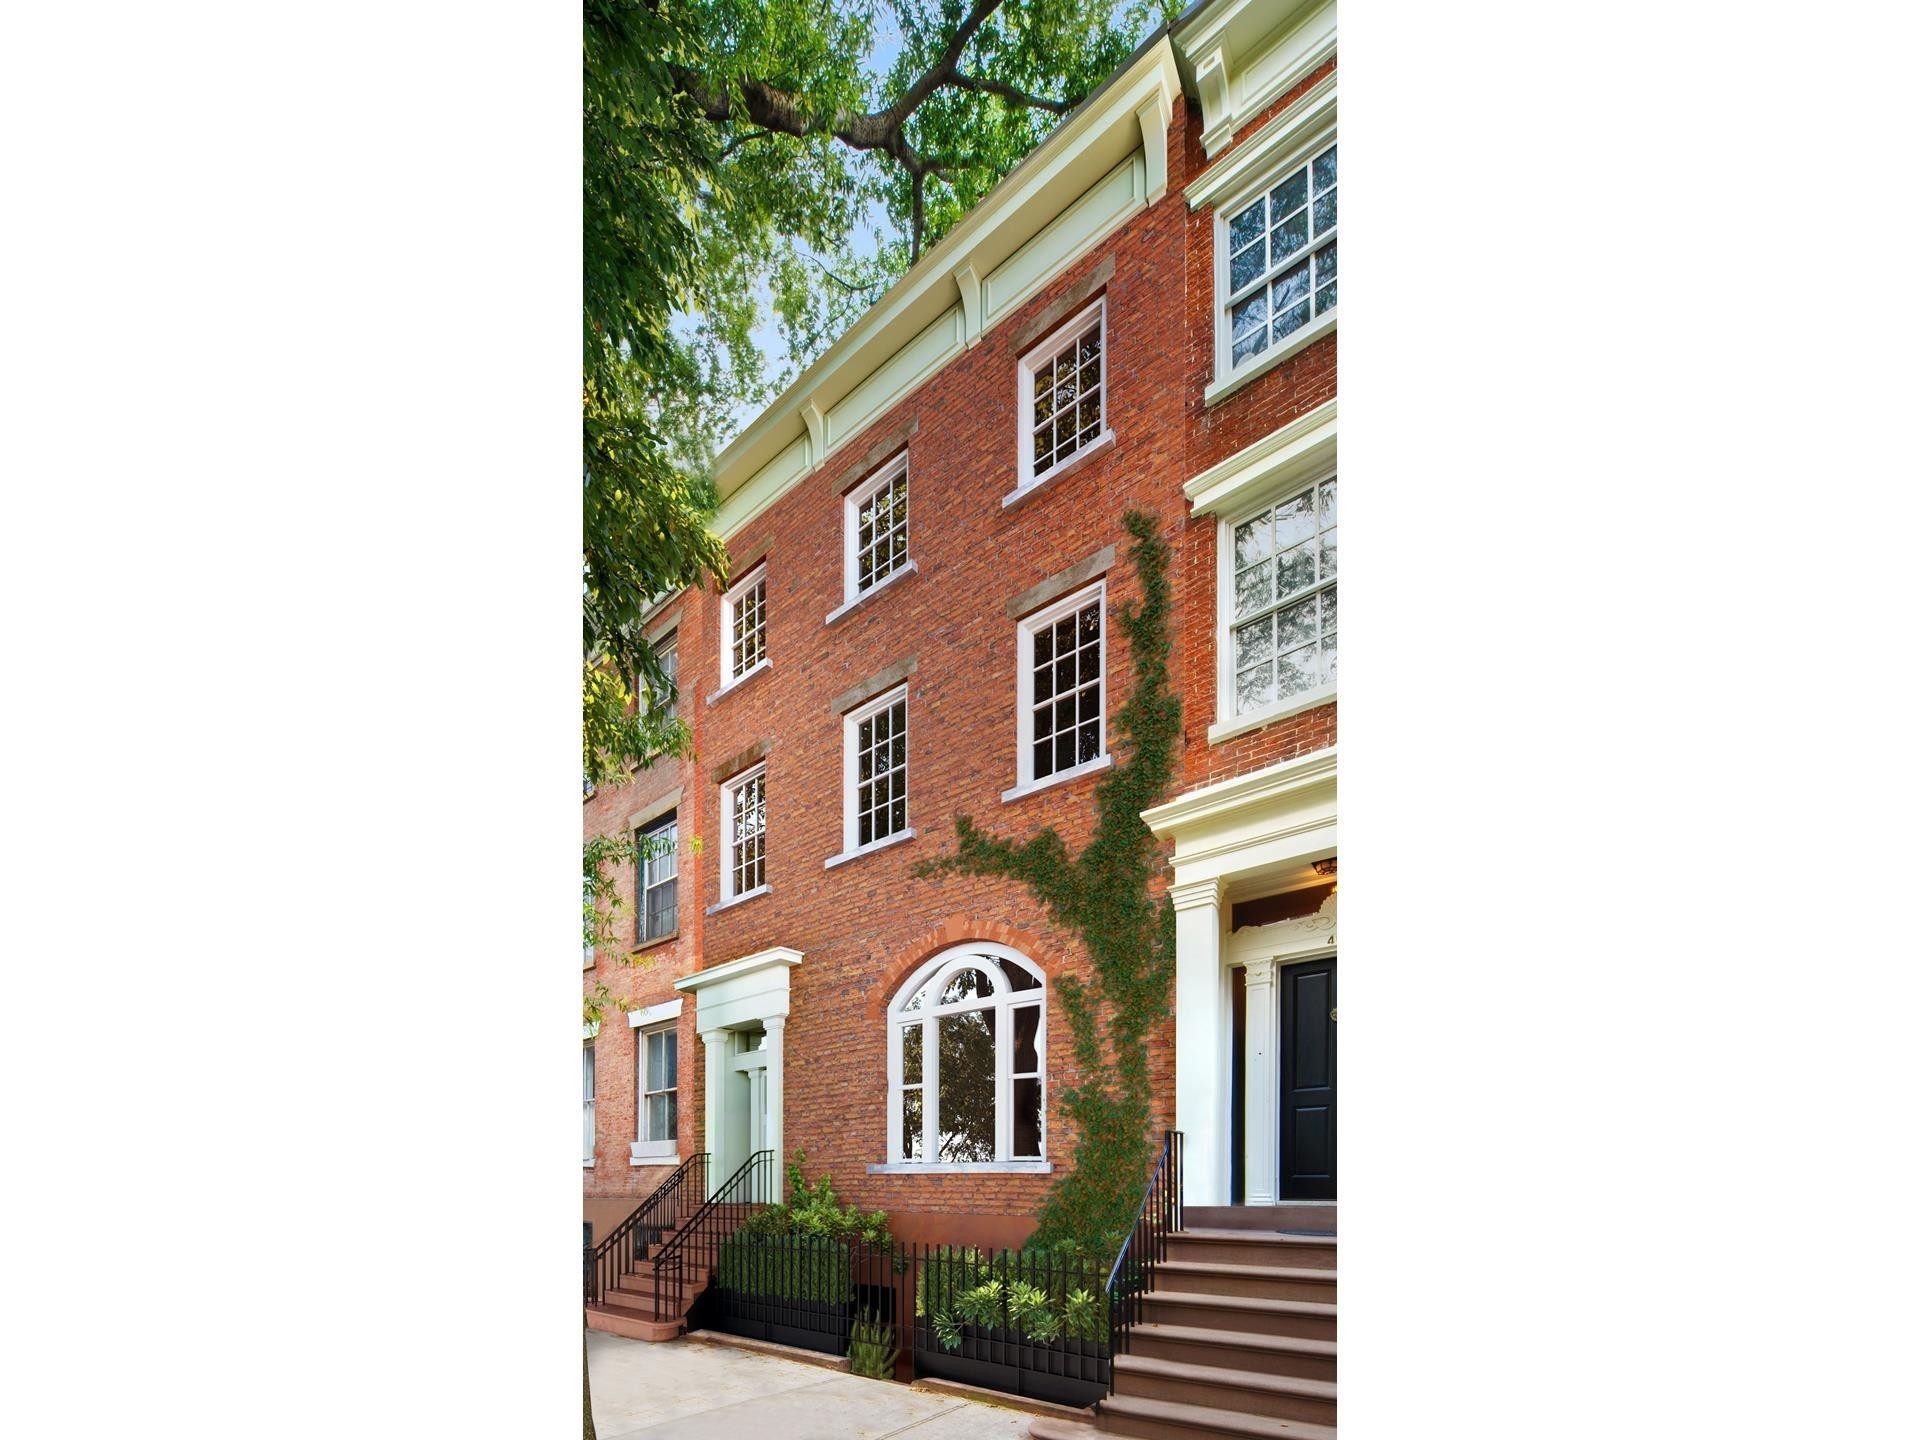 Multi Family Townhouse for Sale at 38 W 11TH ST , TWNHSE Greenwich Village, New York, NY 10011